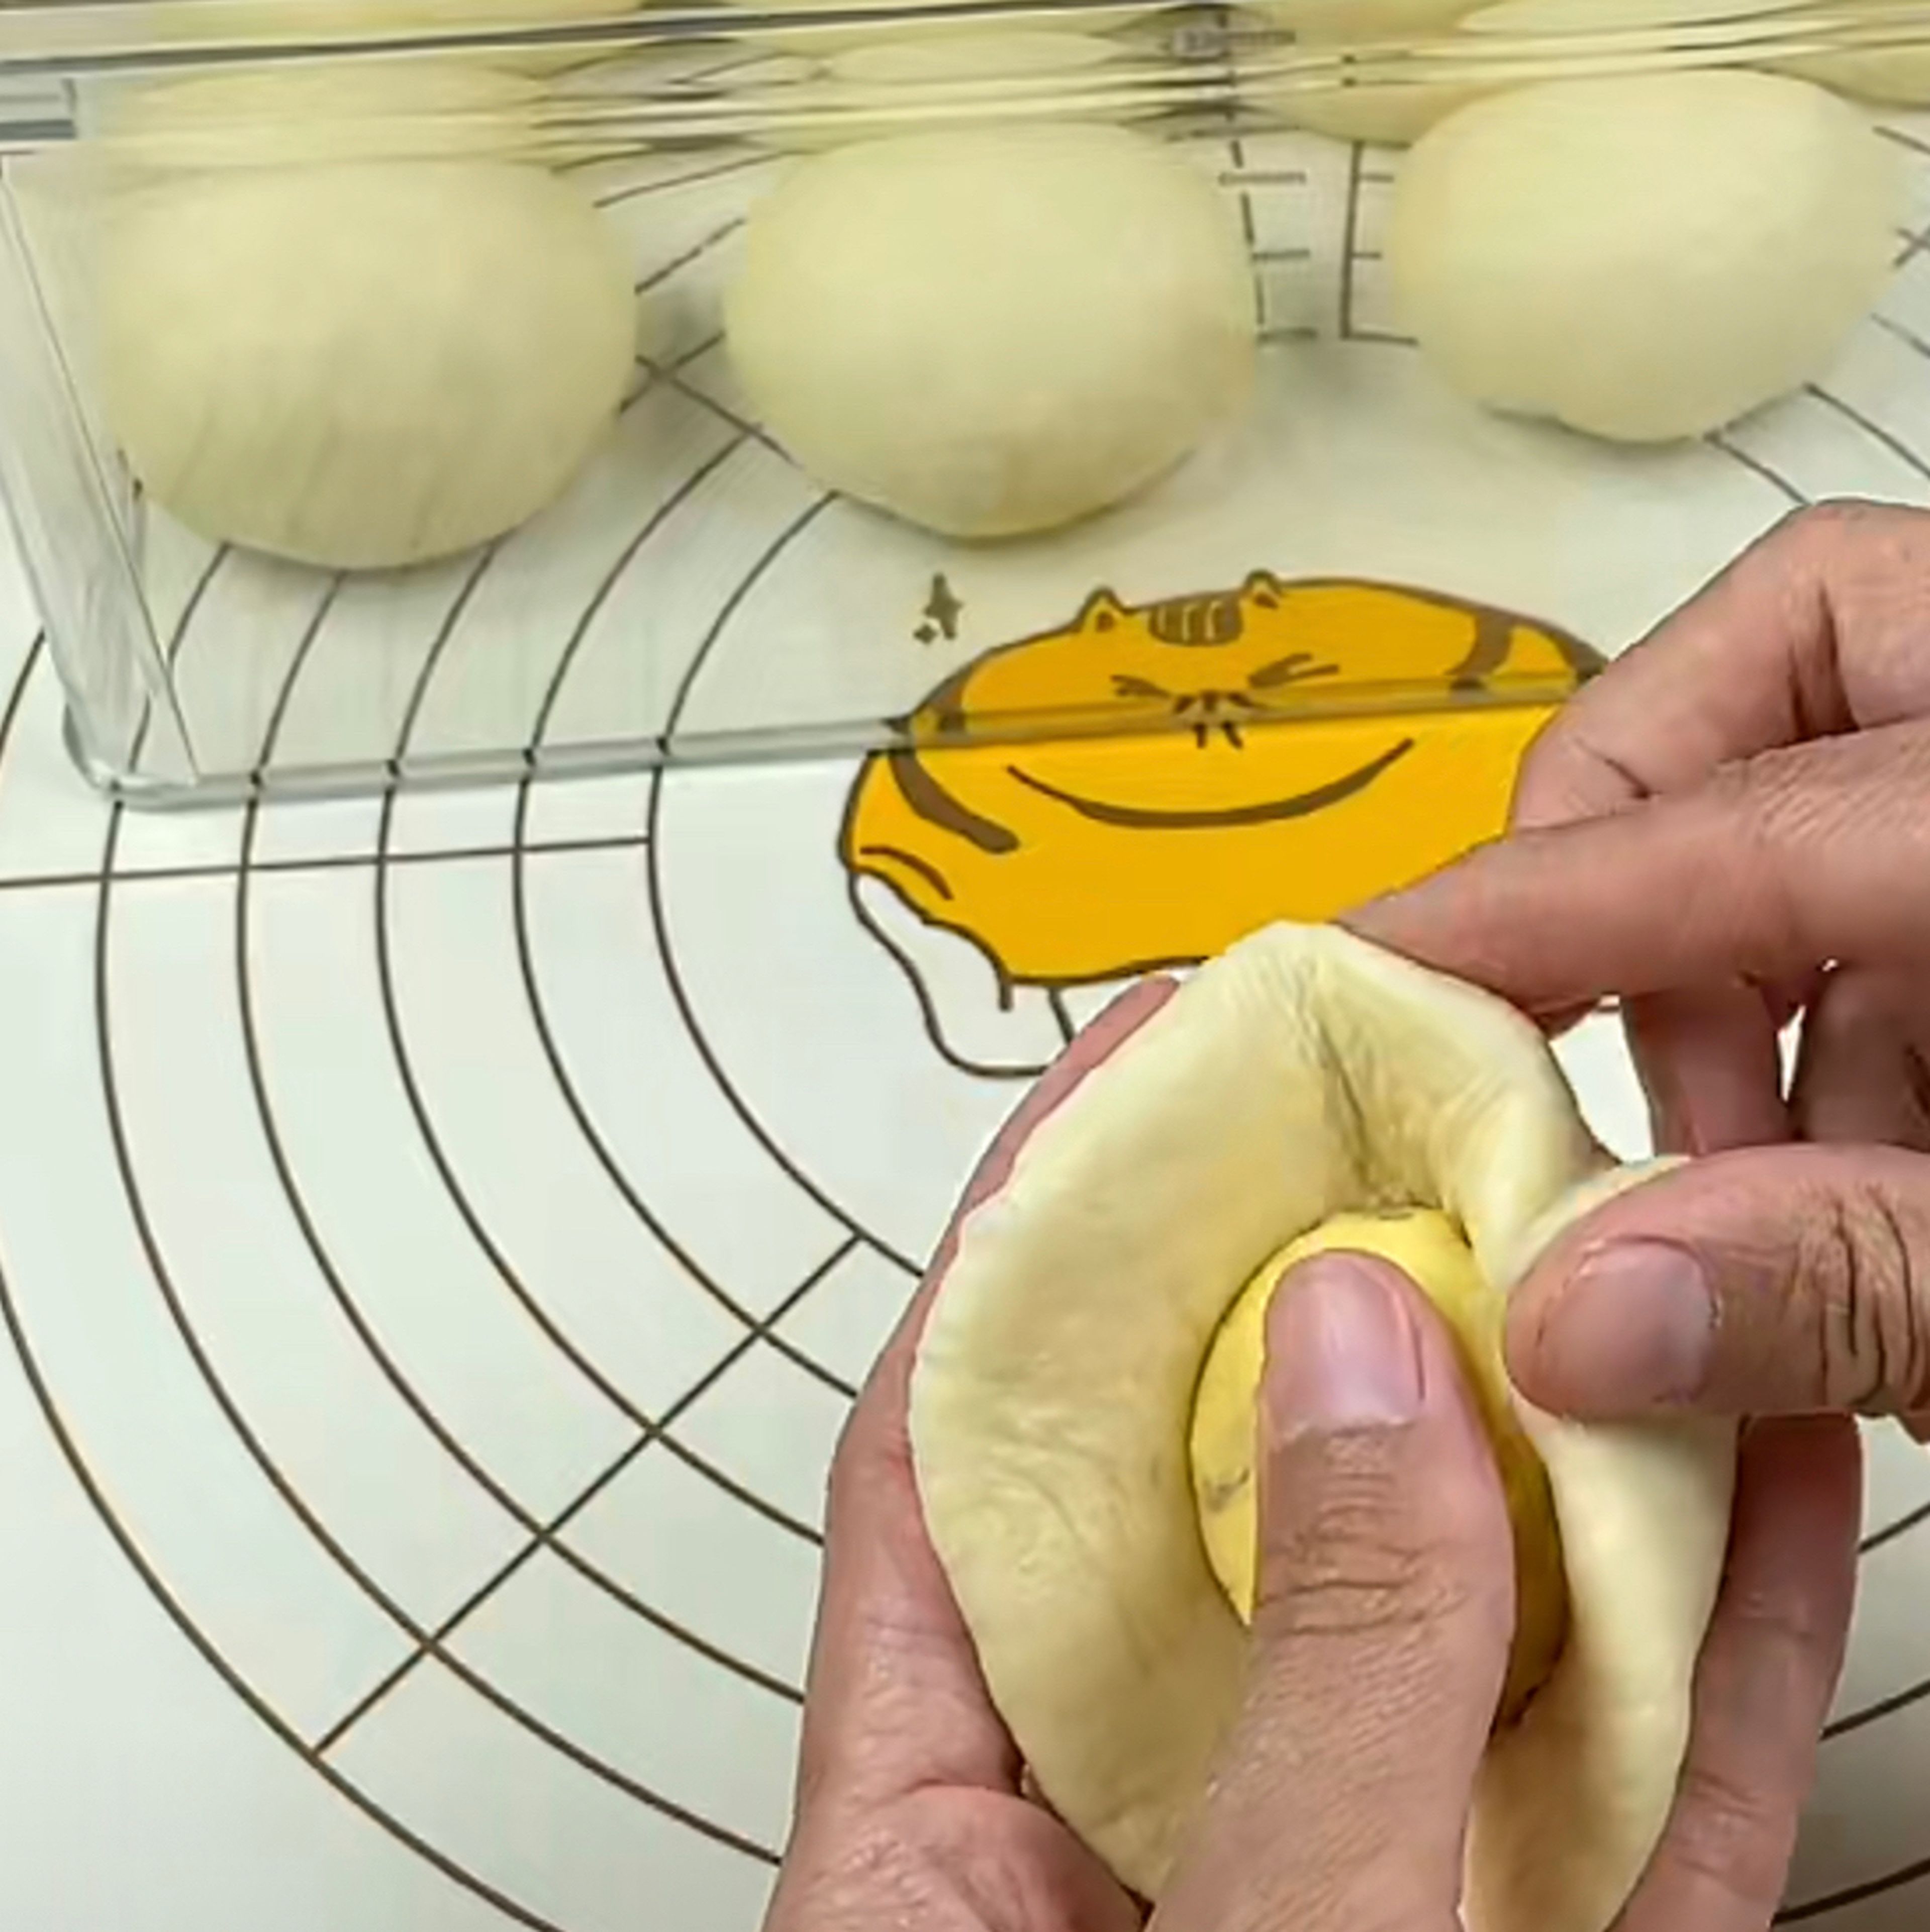 On a clean surface, roll out each dough ball to a flat circle and put about 25g custard filling in the middle then wrap it.